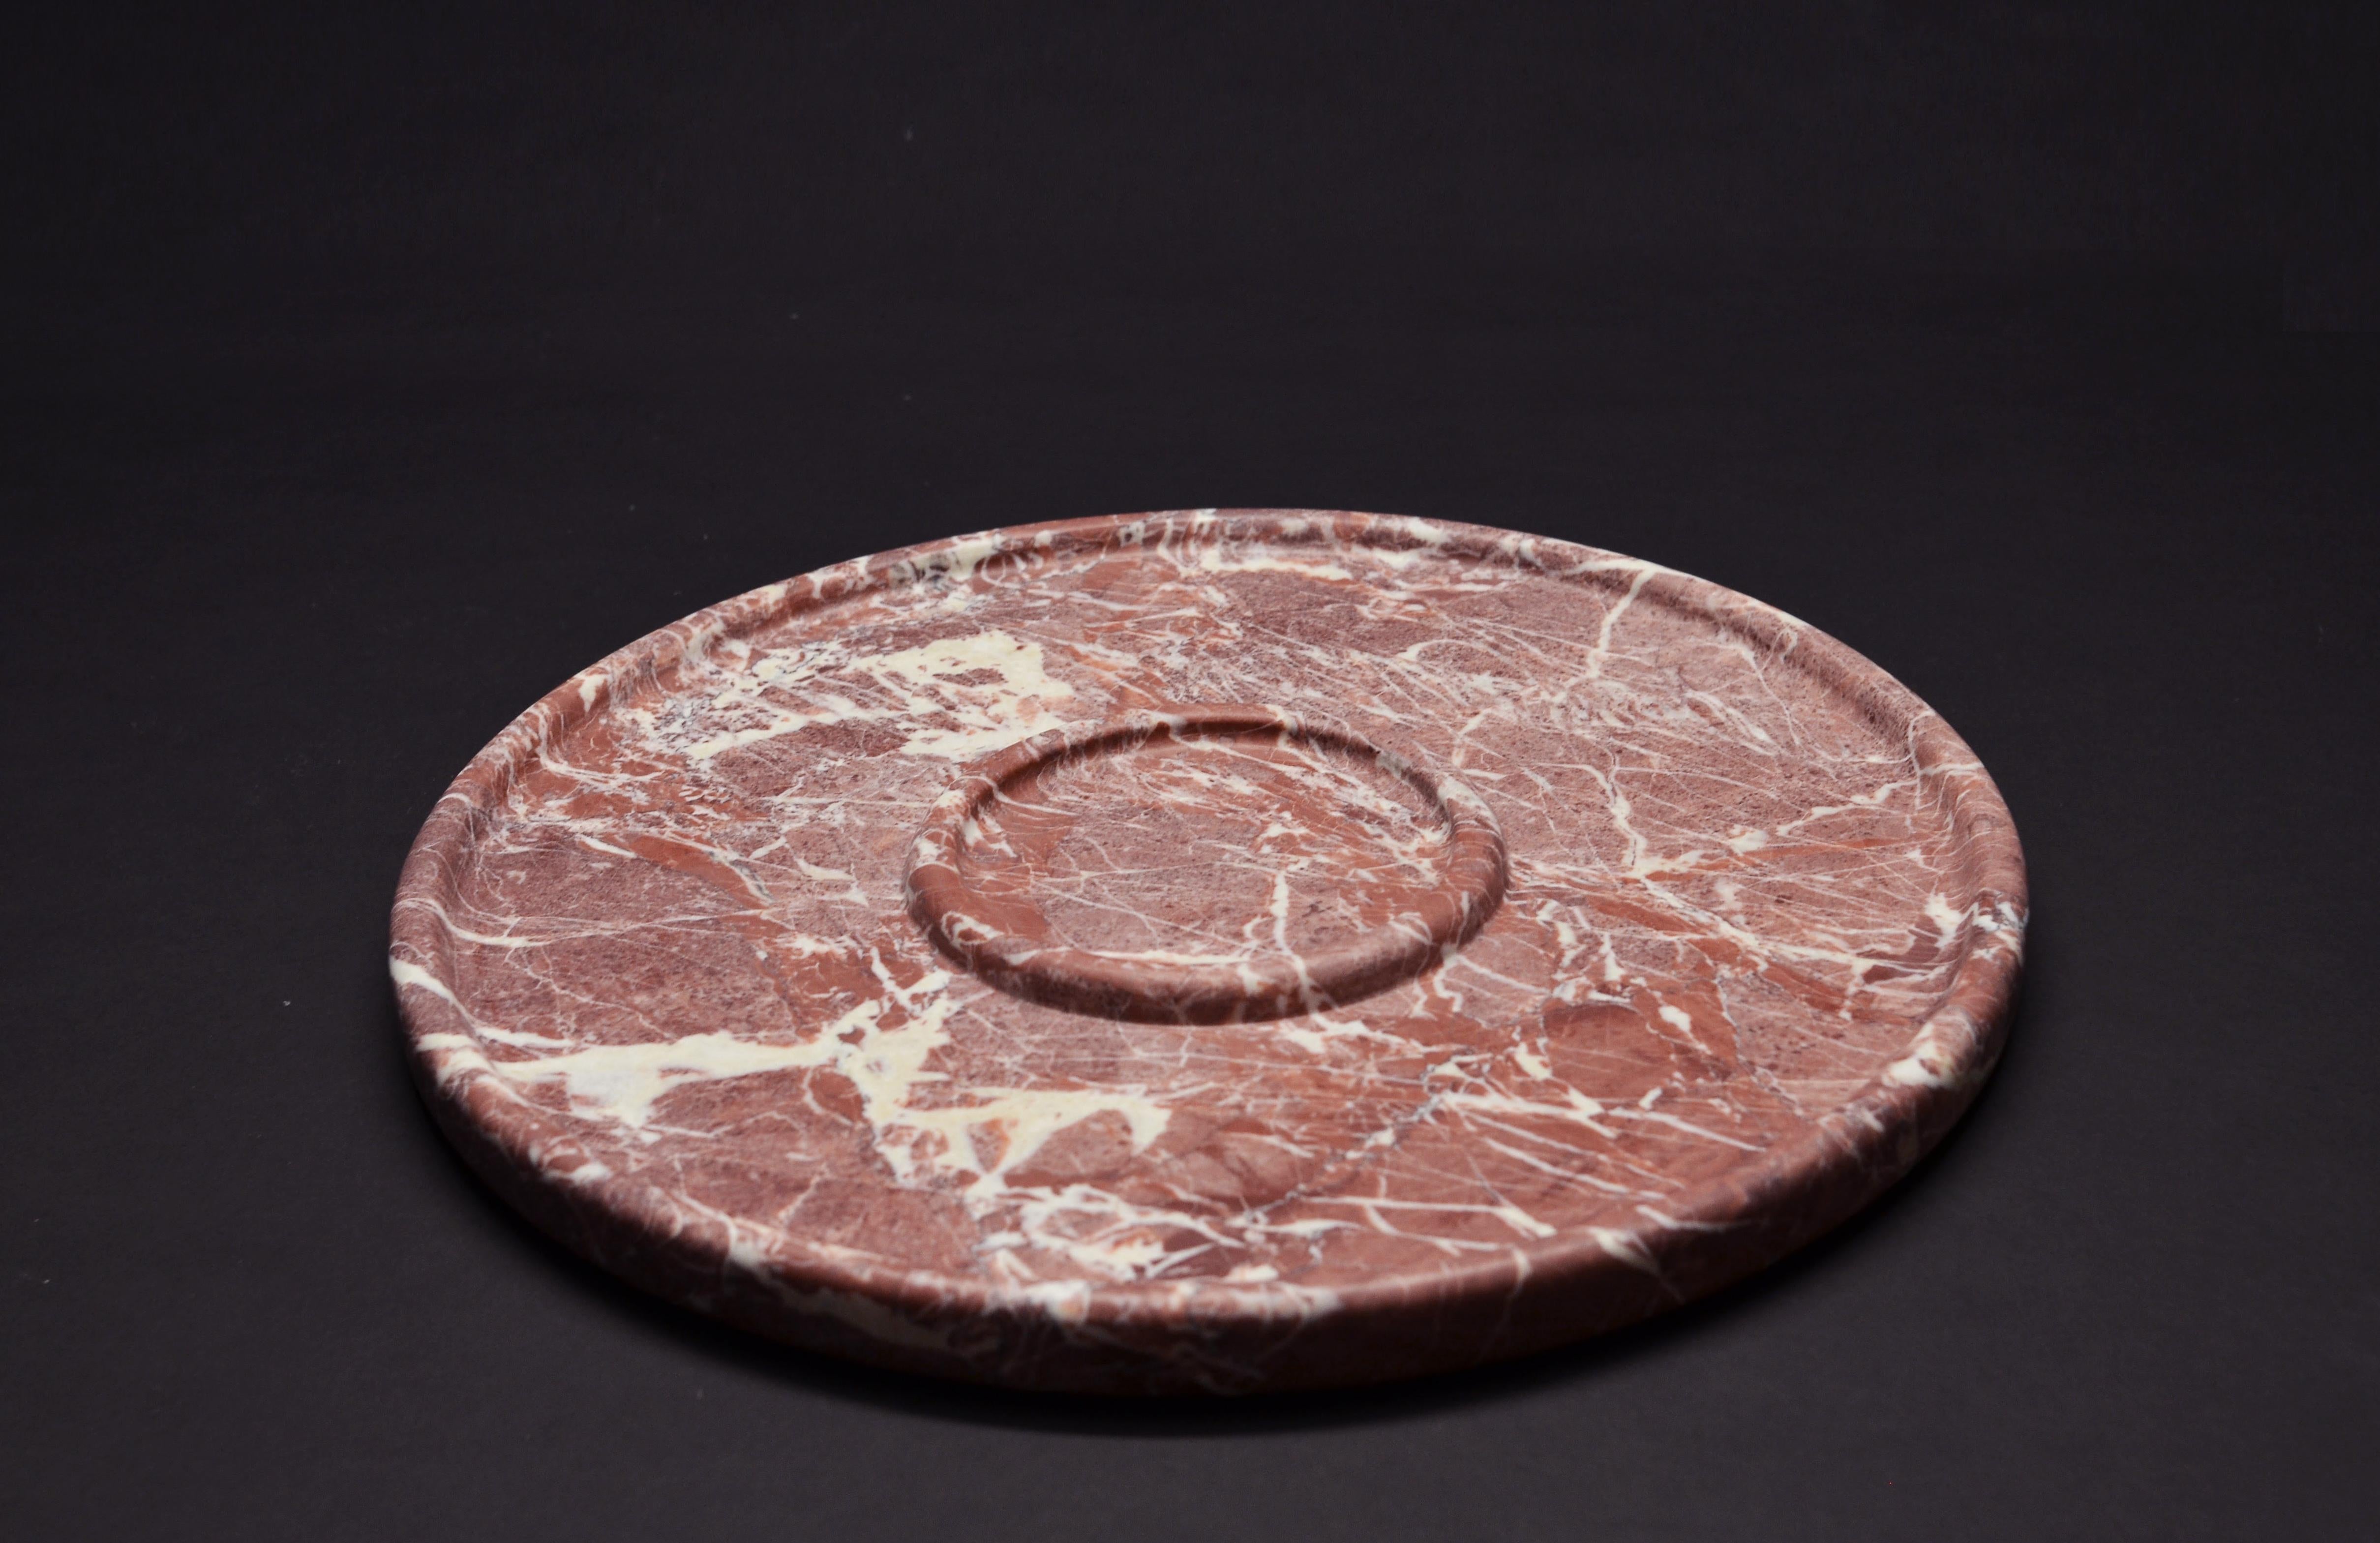 A fruit plate made from hand carved Ritsona Royal-red marble with white veins. Two concentric rings, a large one 35ø, with a smaller one 11.5ø.

Dimensions: 38 ø x 2.3 H cm

Care: Because marble is porous, stains can penetrate into the crystals.